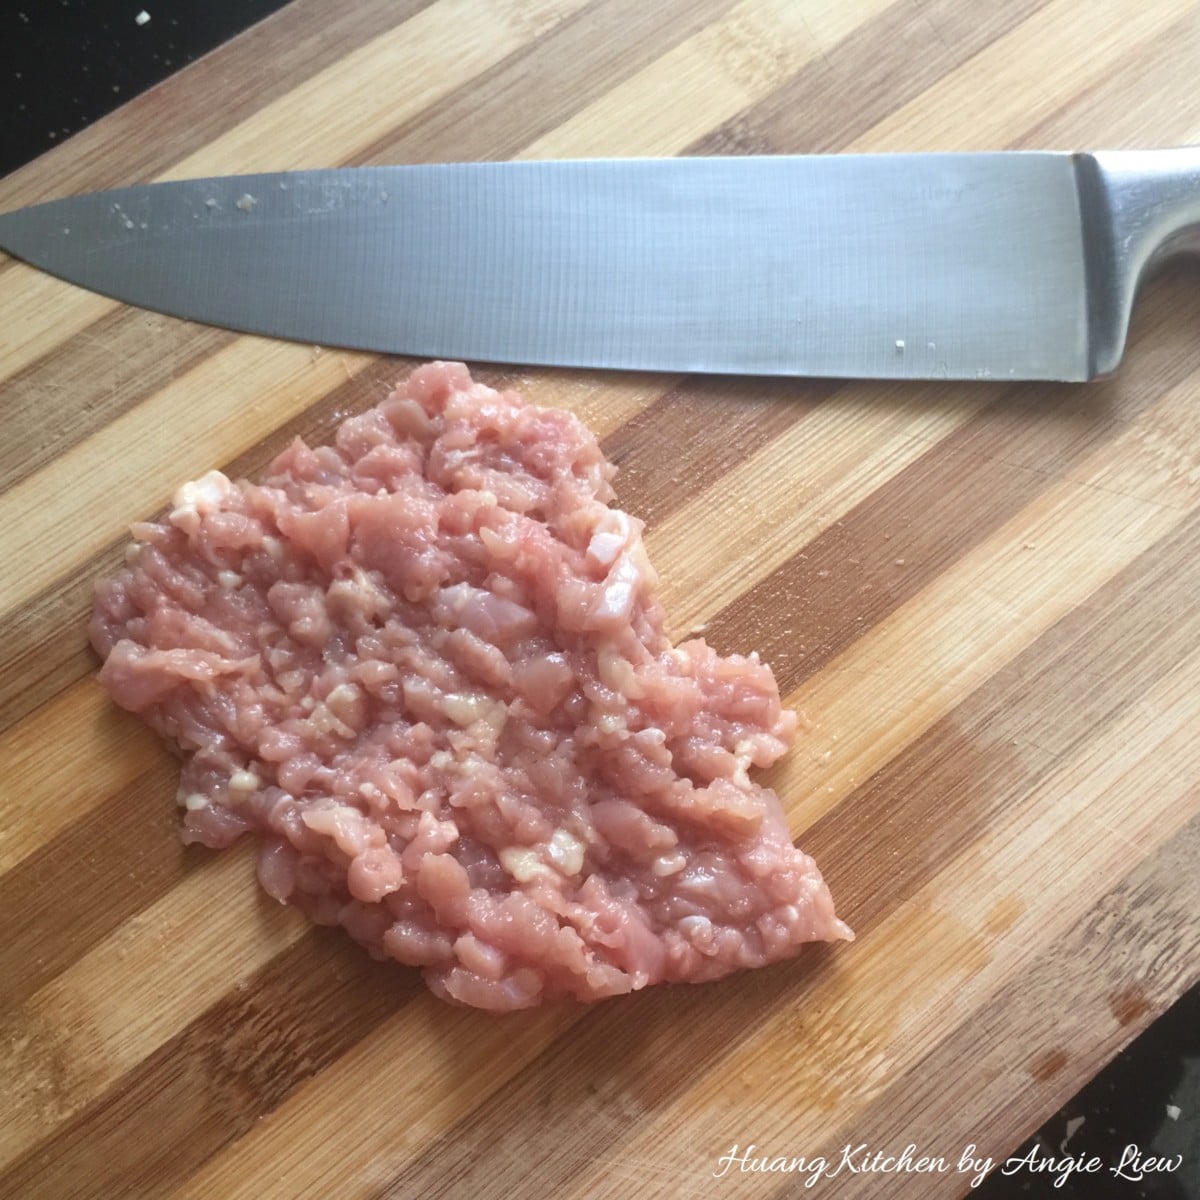 Mince some meat.